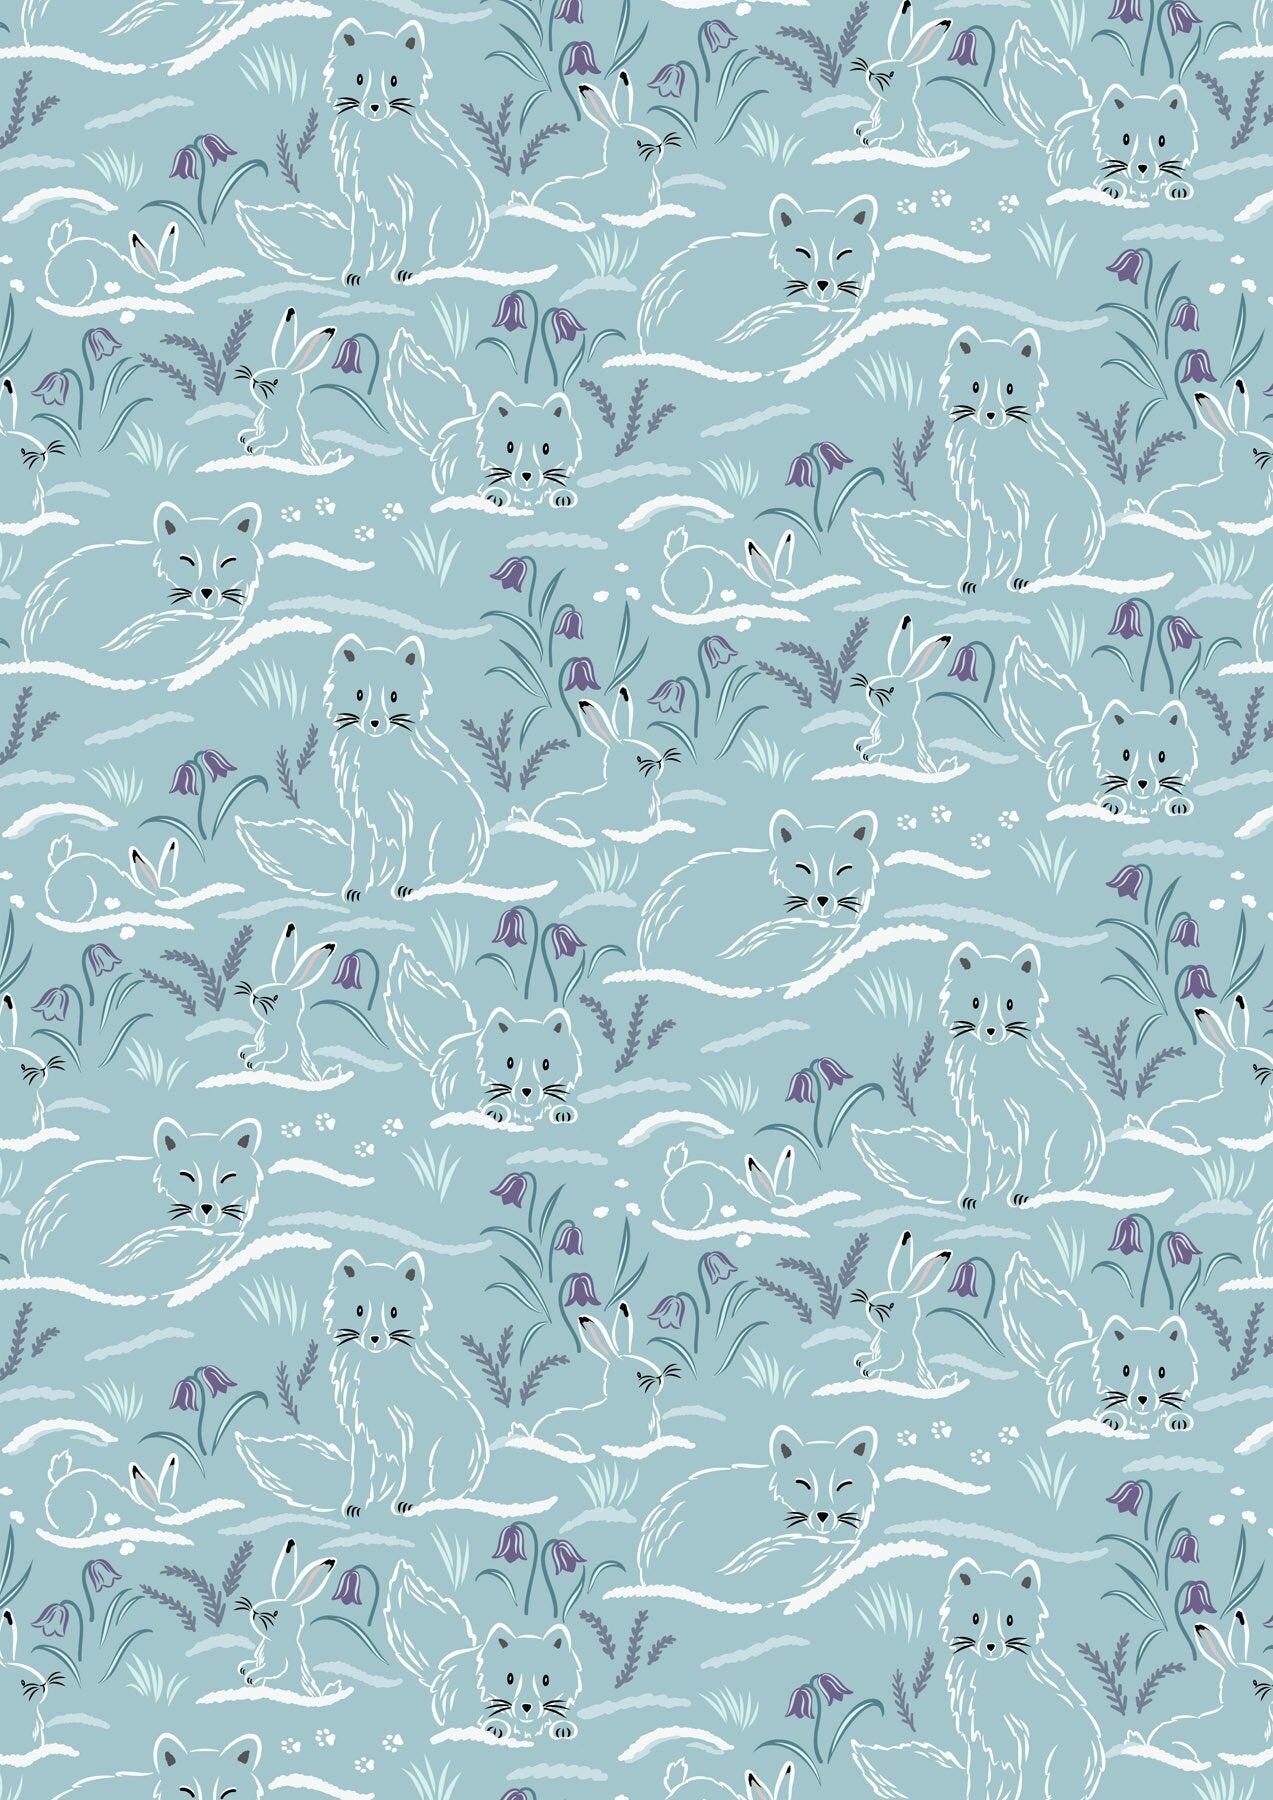 Arctic Fox and Rabbit Fabric - Haring Around on Arctic Blue - 100% Cotton - by Lewis & Irene - Winter Snow Animals - Snowshoe hare